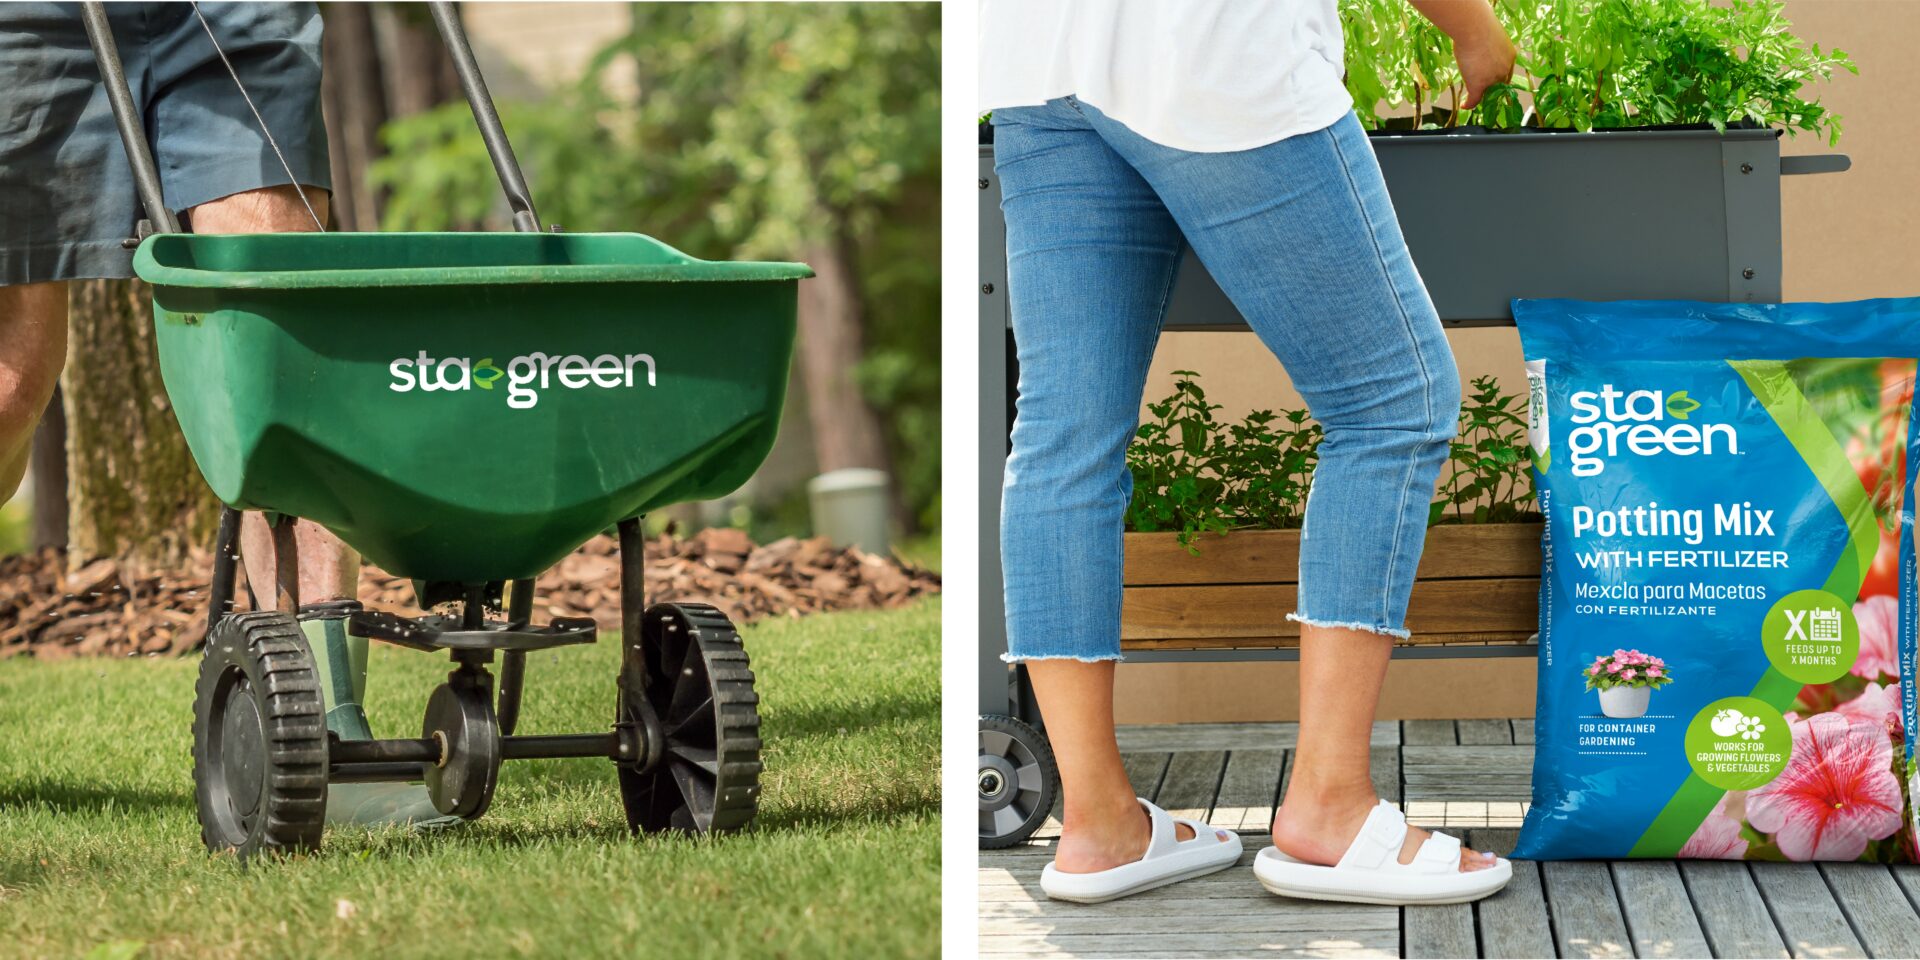 Lowes – Sta-Green